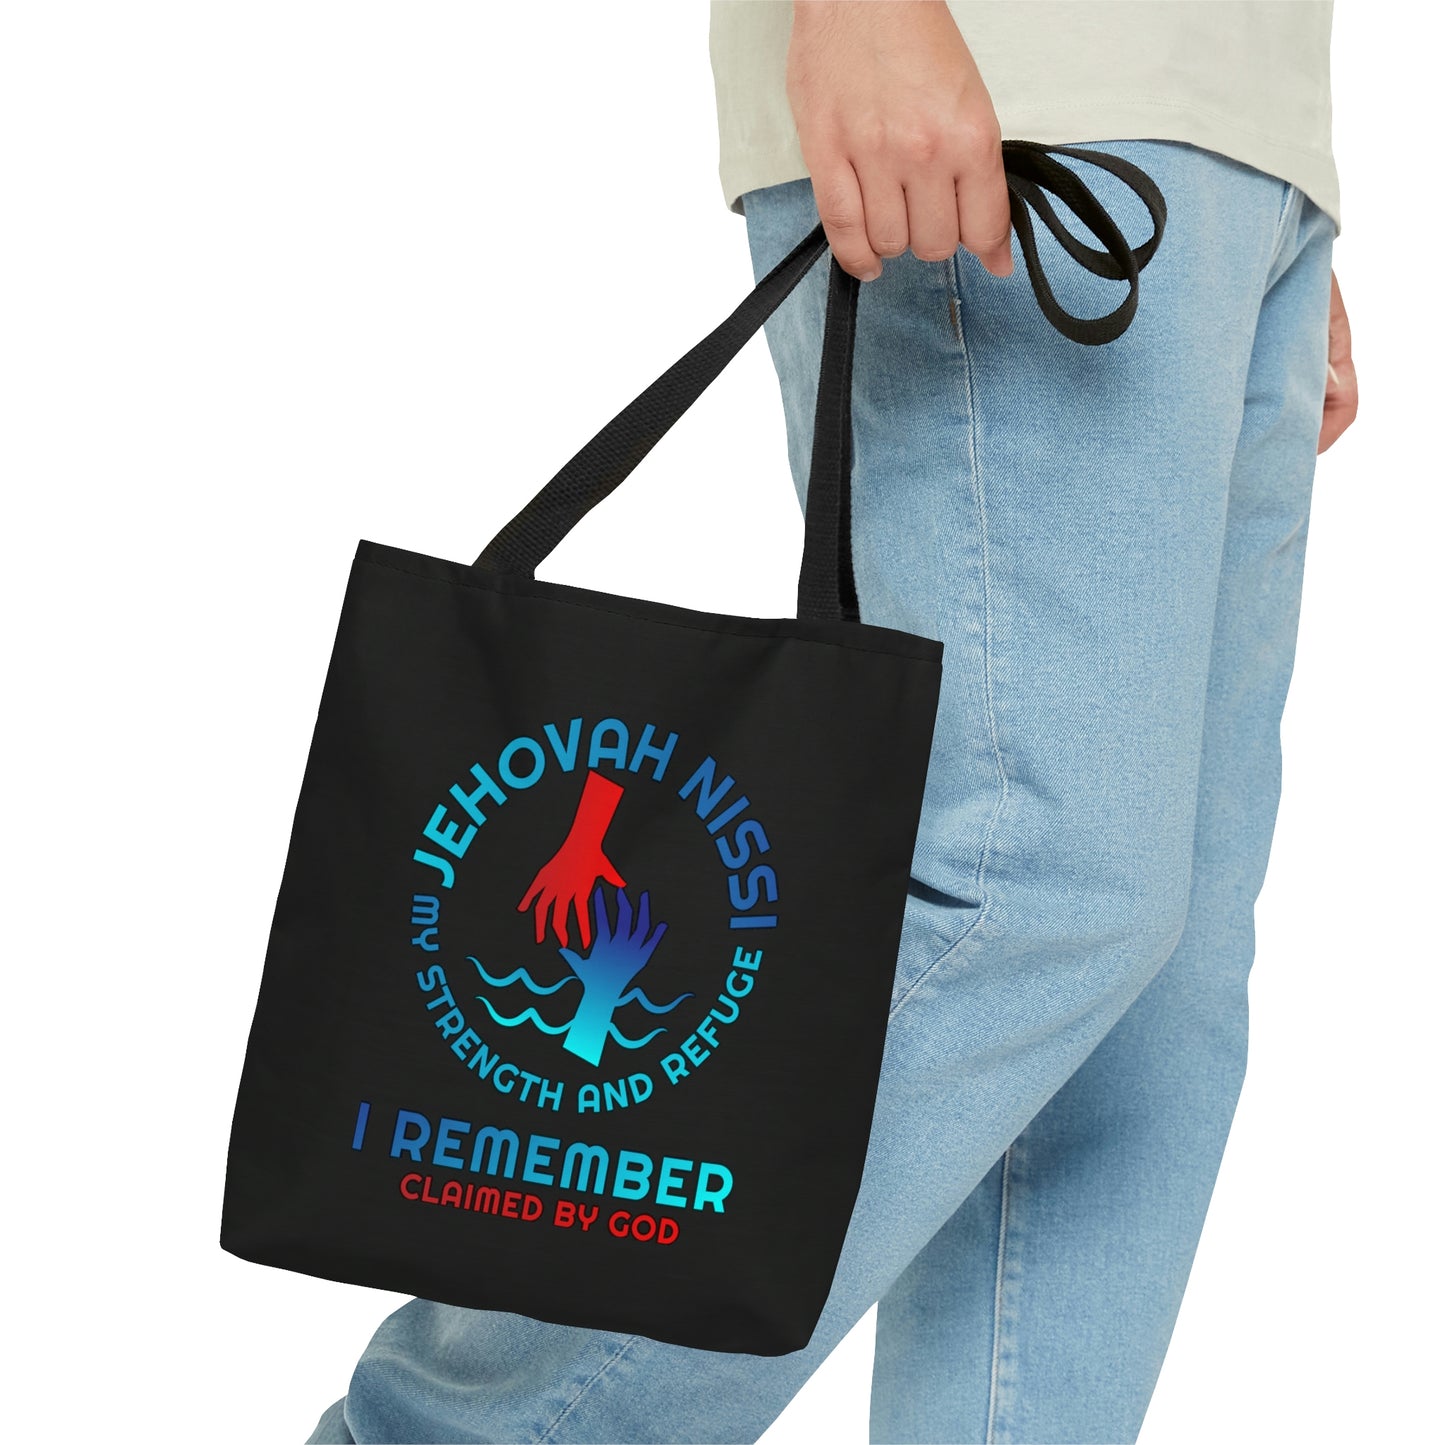 Jehovah Nissi My Strength and Refuge I Remember Tote Bag